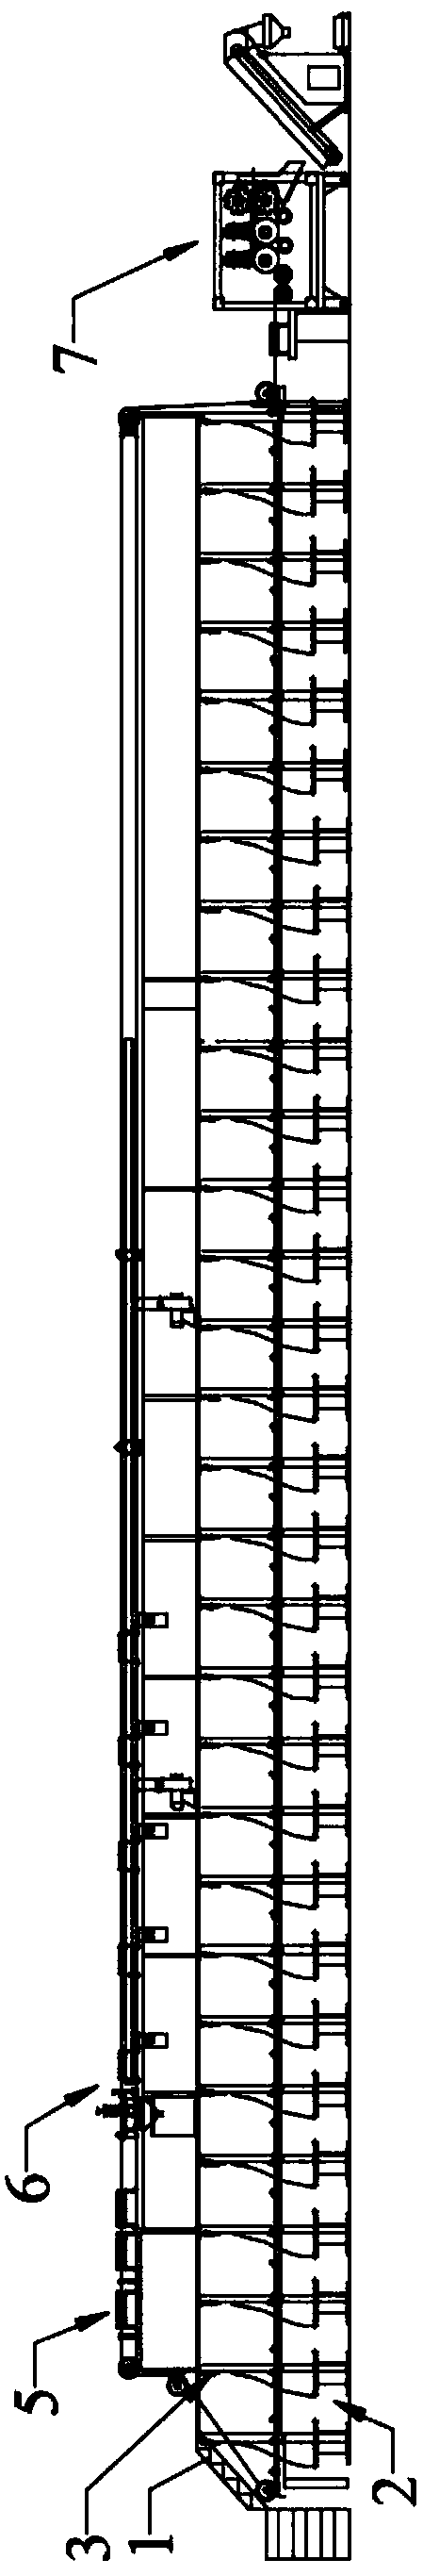 Manufacturing equipment for rows of steel fibers